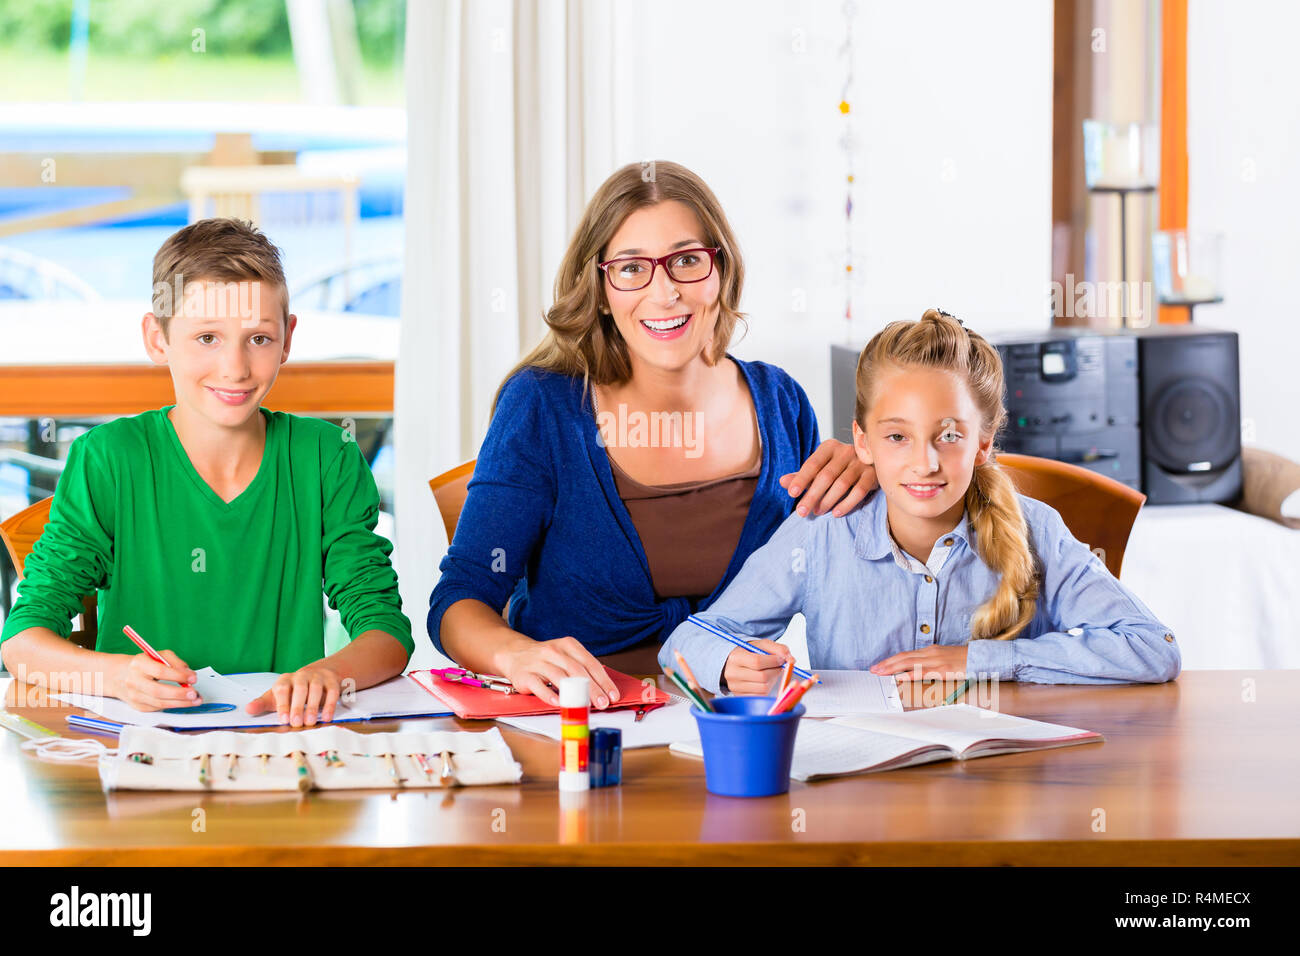 Private teacher giving lessons at home Stock Photo